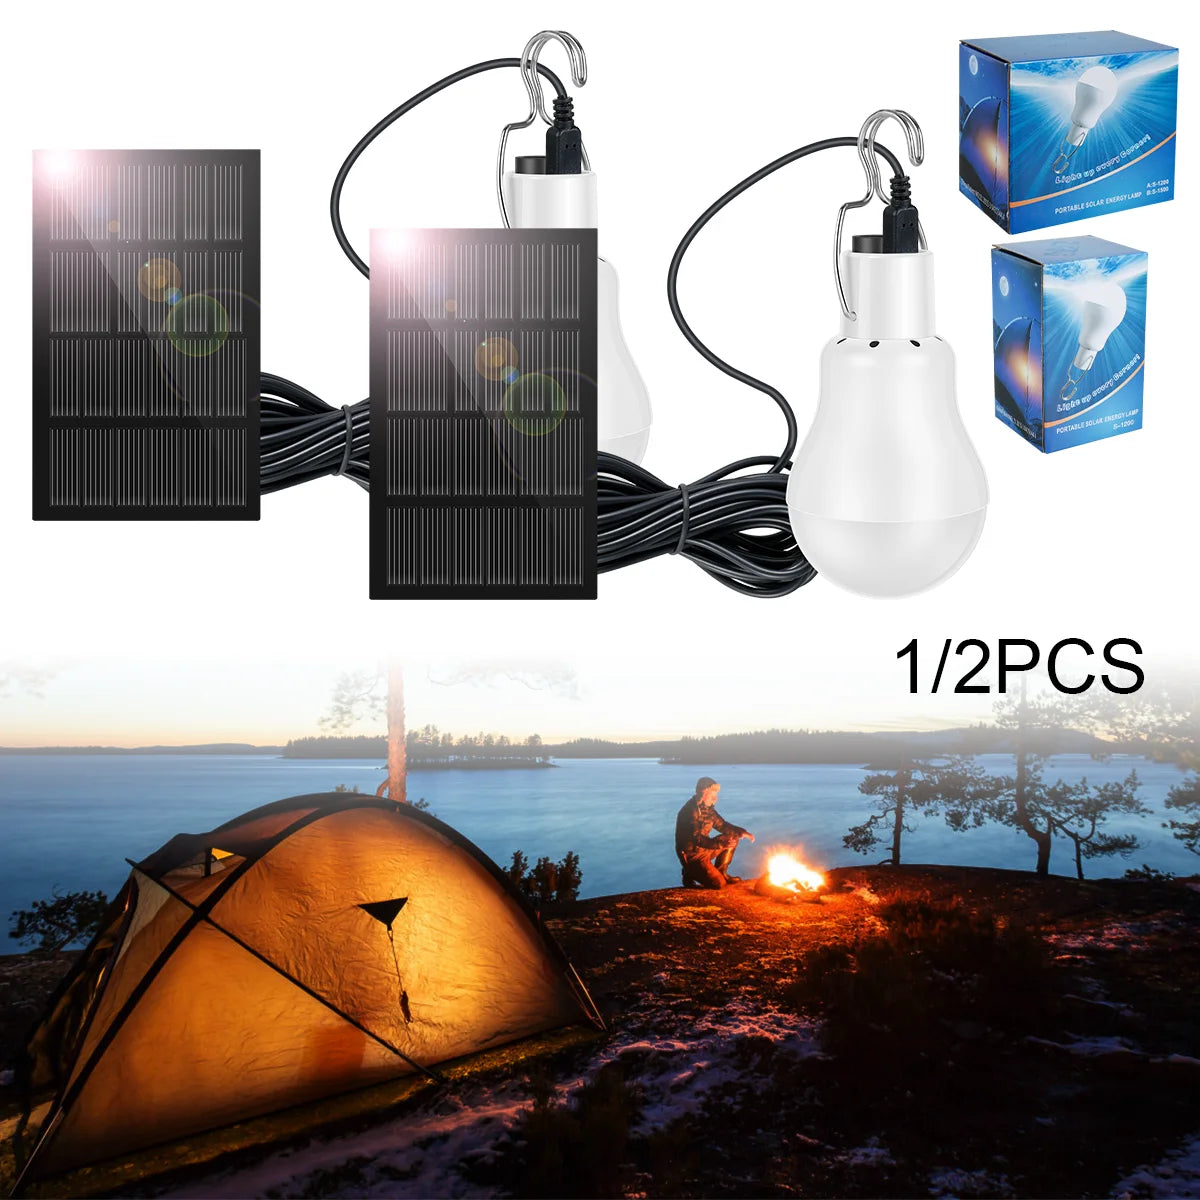 solar light, Outdoor solar lamp provides bright LED lighting for camping or fishing trips.